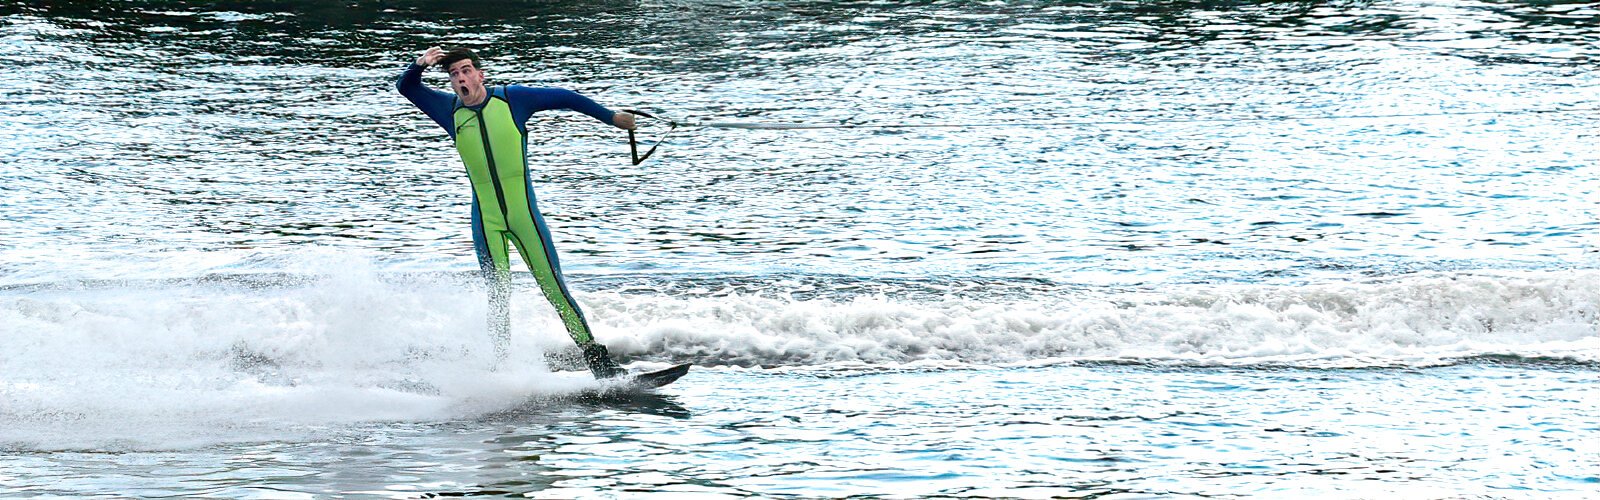 A non-profit organization, the Tampa Bay Water Ski Show Team performs at various tournaments and shows throughout the year.